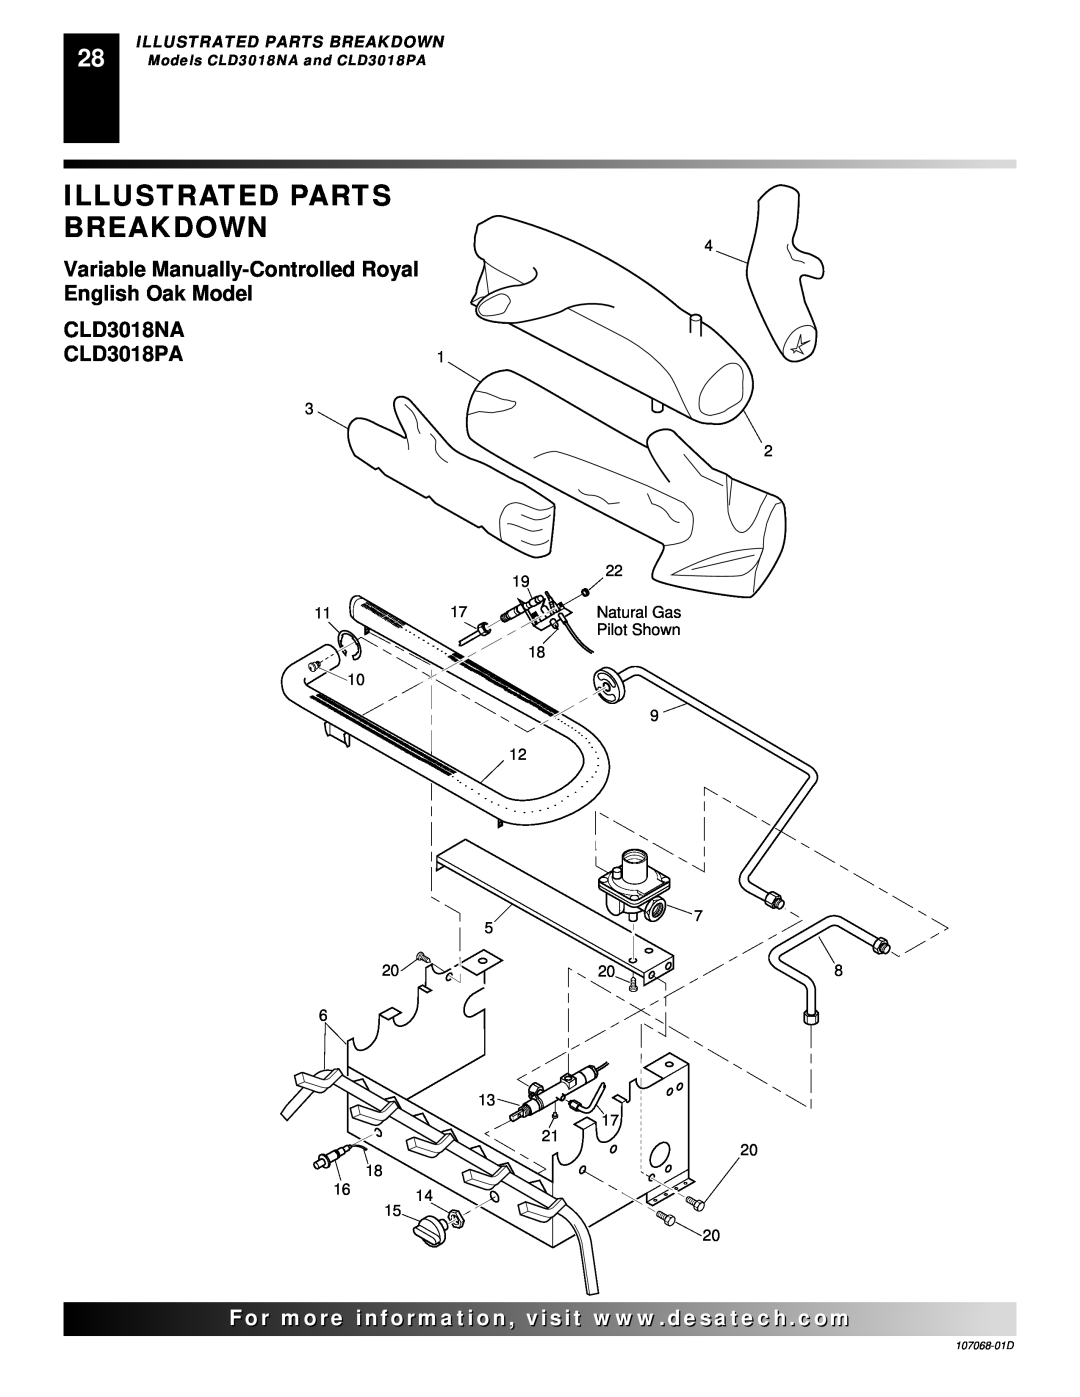 Desa CGS3124P CLD3018NA CLD3018PA, Illustrated Parts Breakdown, Models CLD3018NA and CLD3018PA, 107068-01D 